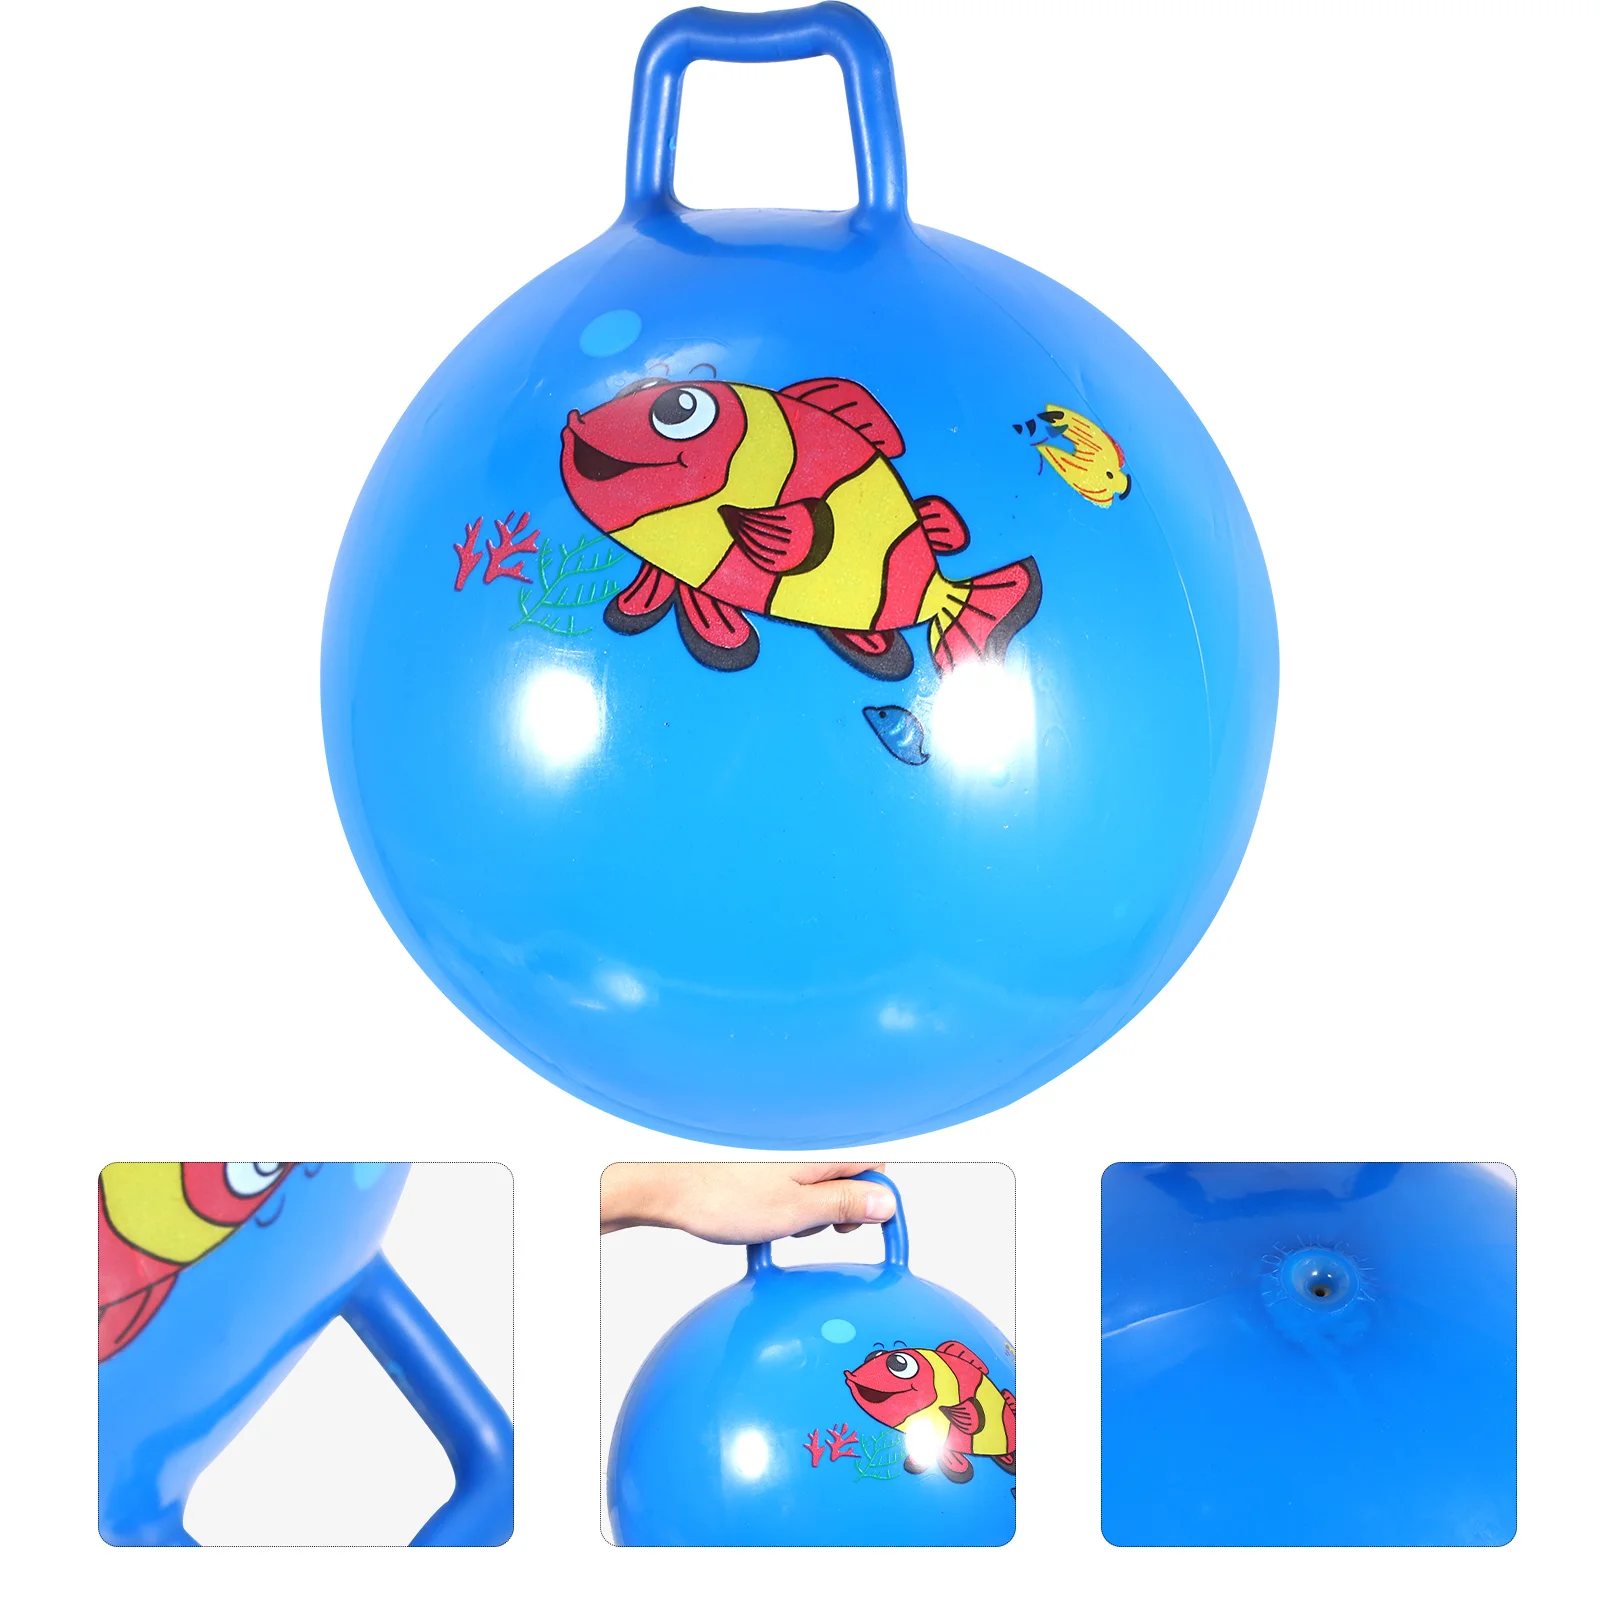 

Kids Bouncyhopper Bounce Ballsjumping Hopping Toys Hop Handles Inflatable Handle Horse Bouncing Toy Animal Space Ride6 Hippity